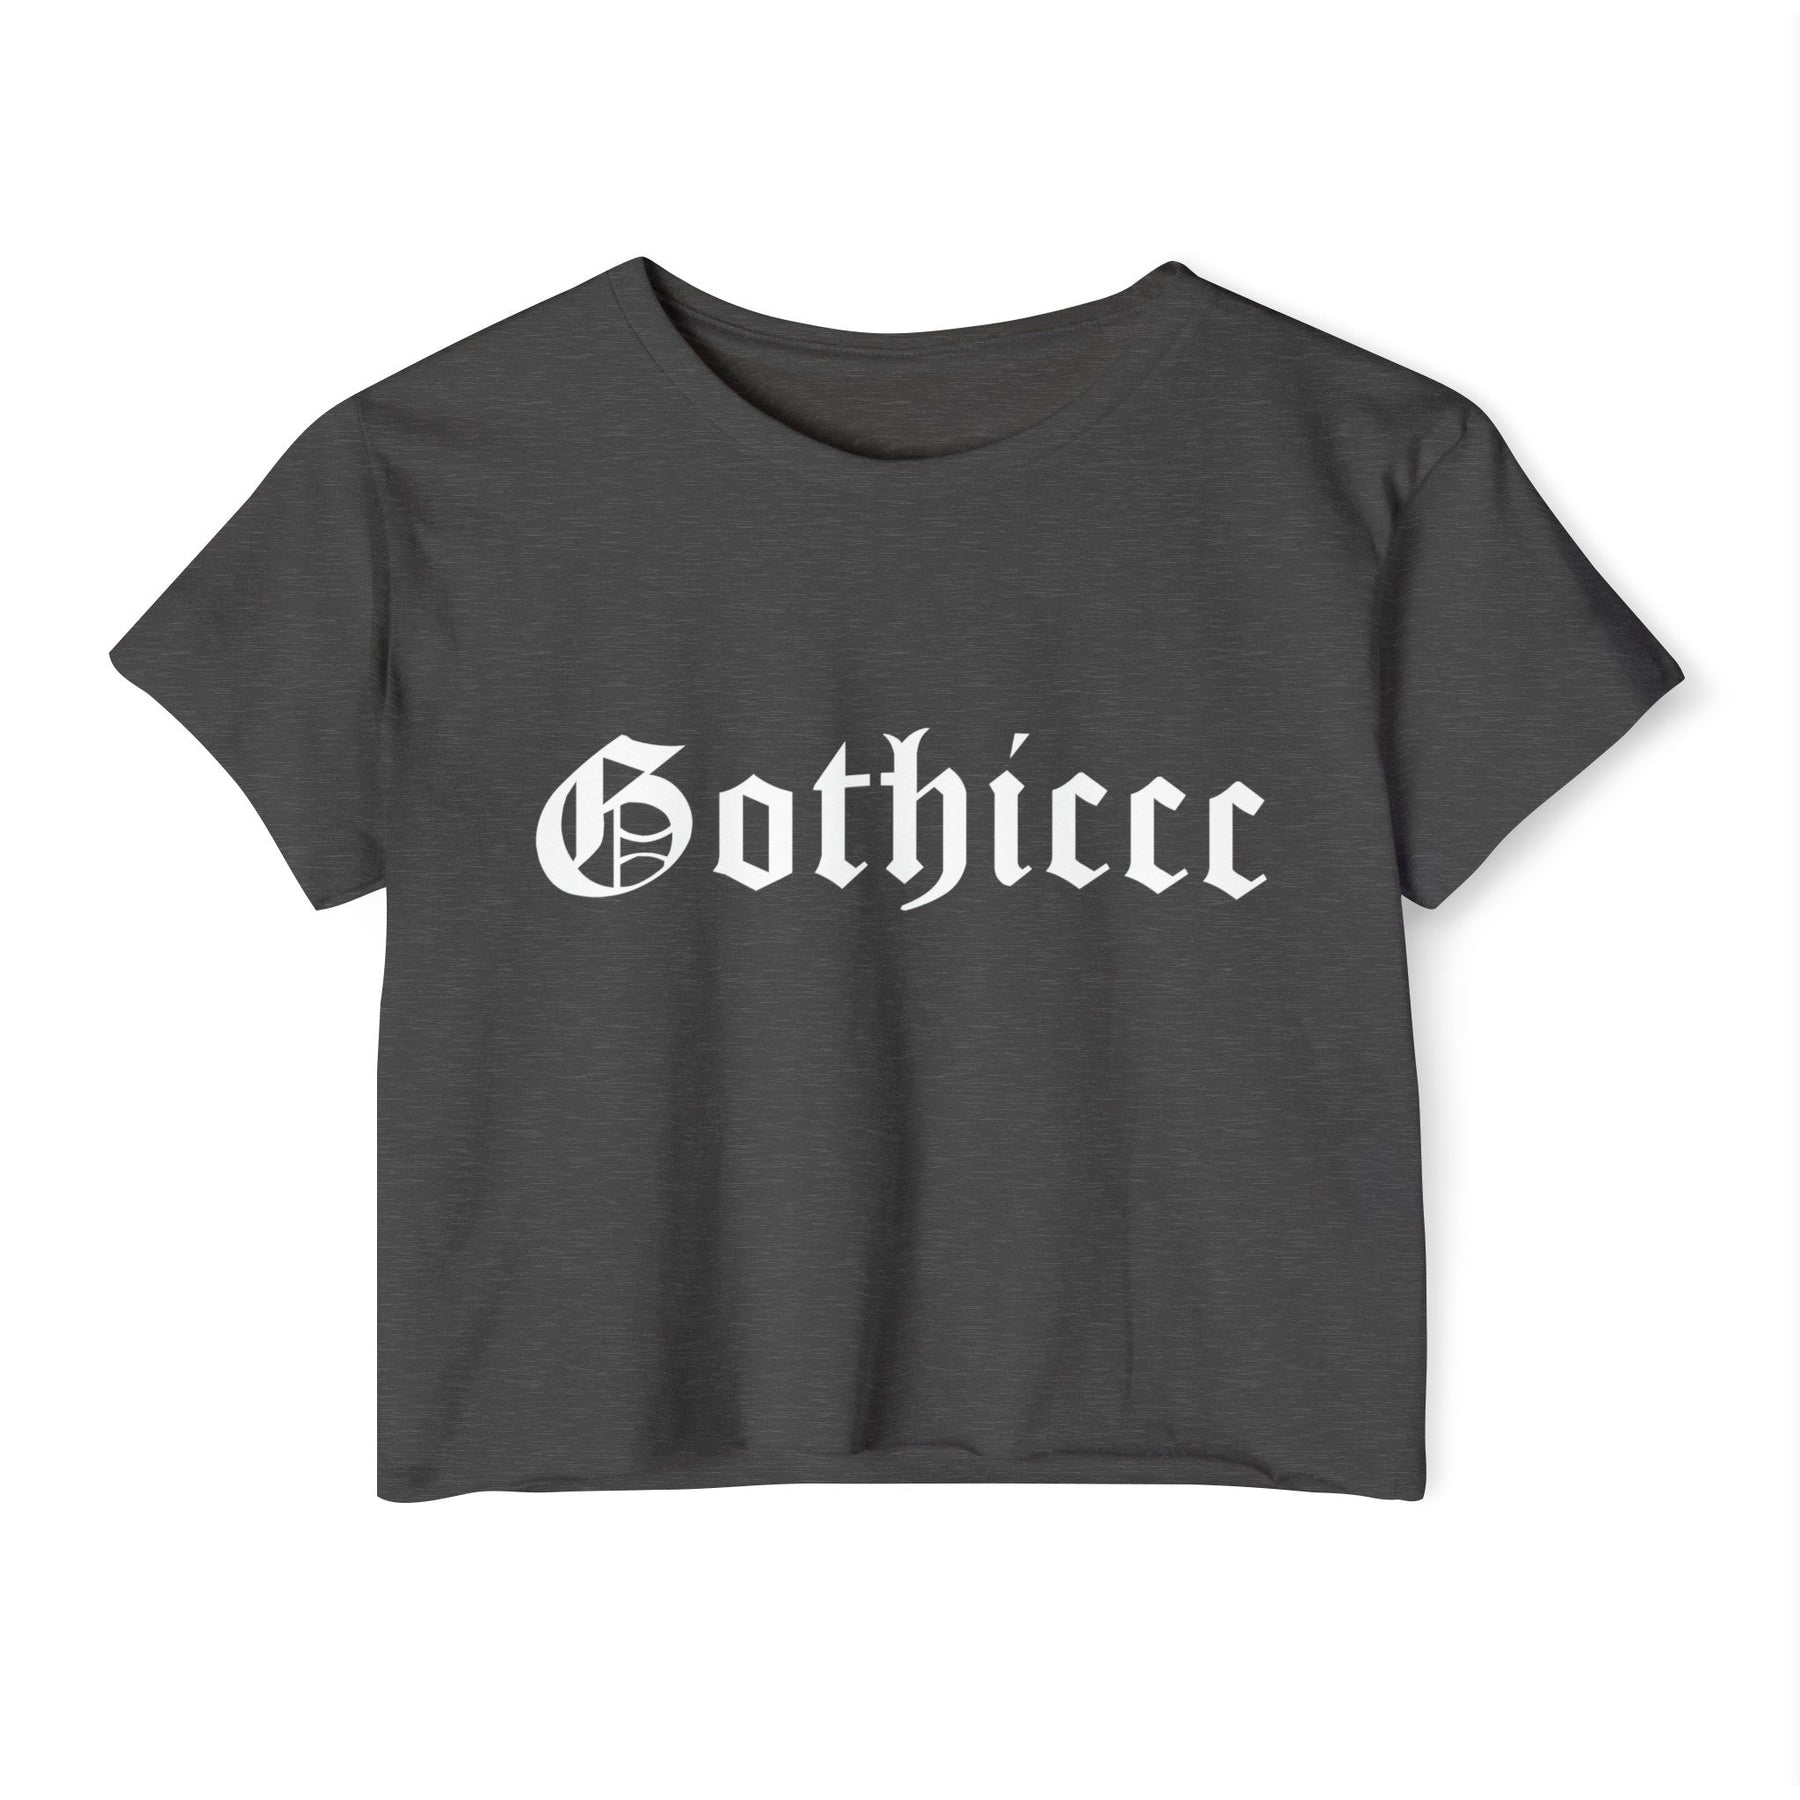 Gothiccc Women's Lightweight Crop Top - Goth Cloth Co.T - Shirt32731467709484375005